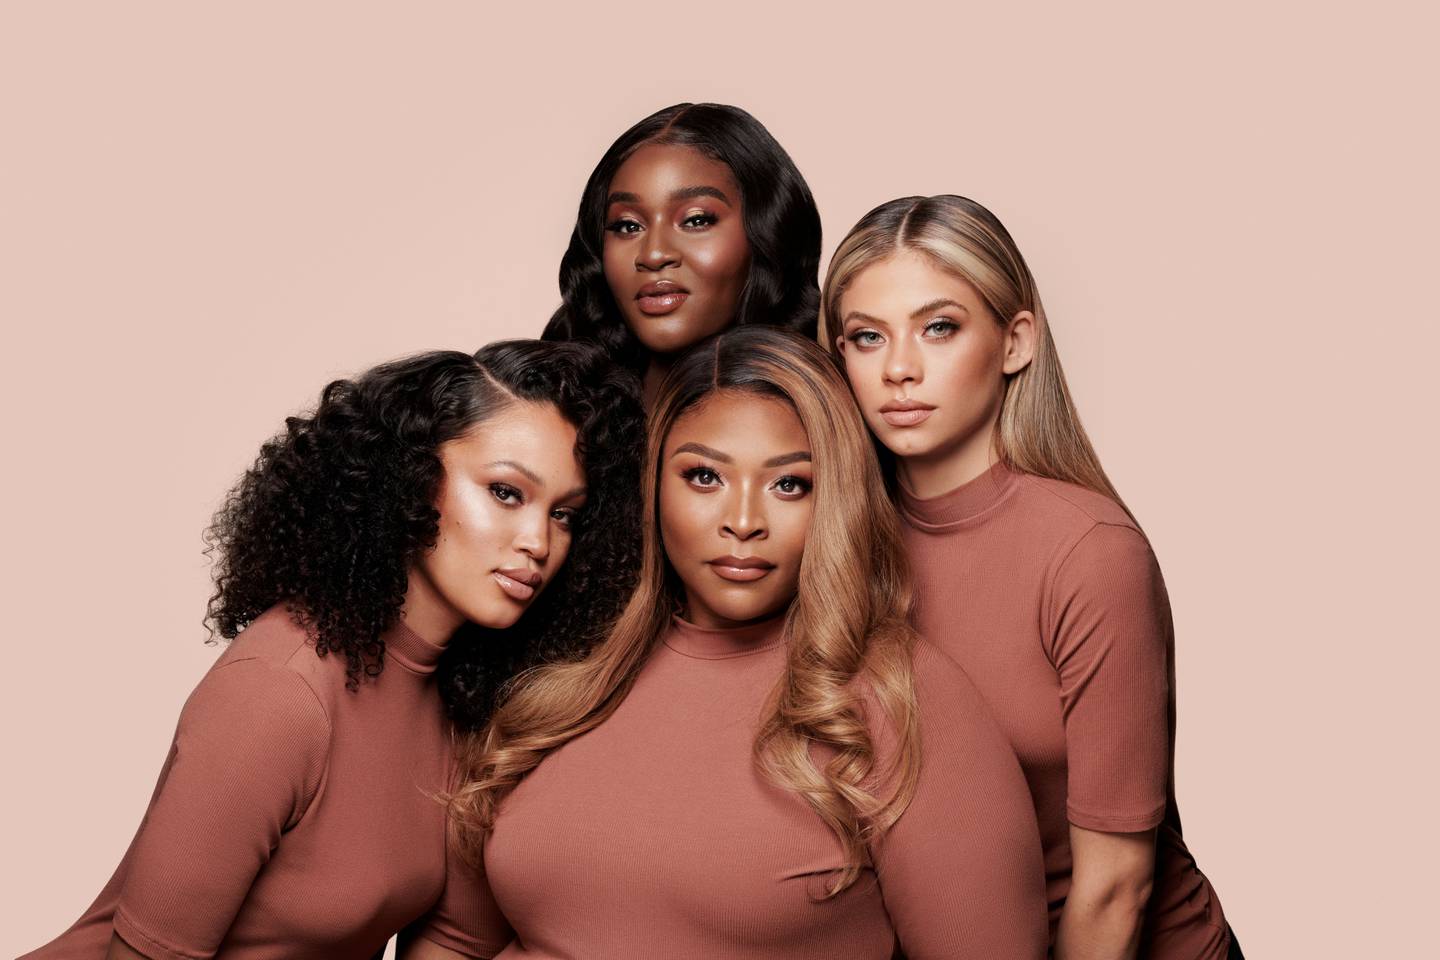 LYS Beauty, founded by Tisha Thompson, is the latest no-makeup beauty brand on the market, and has become a best seller at Sephora